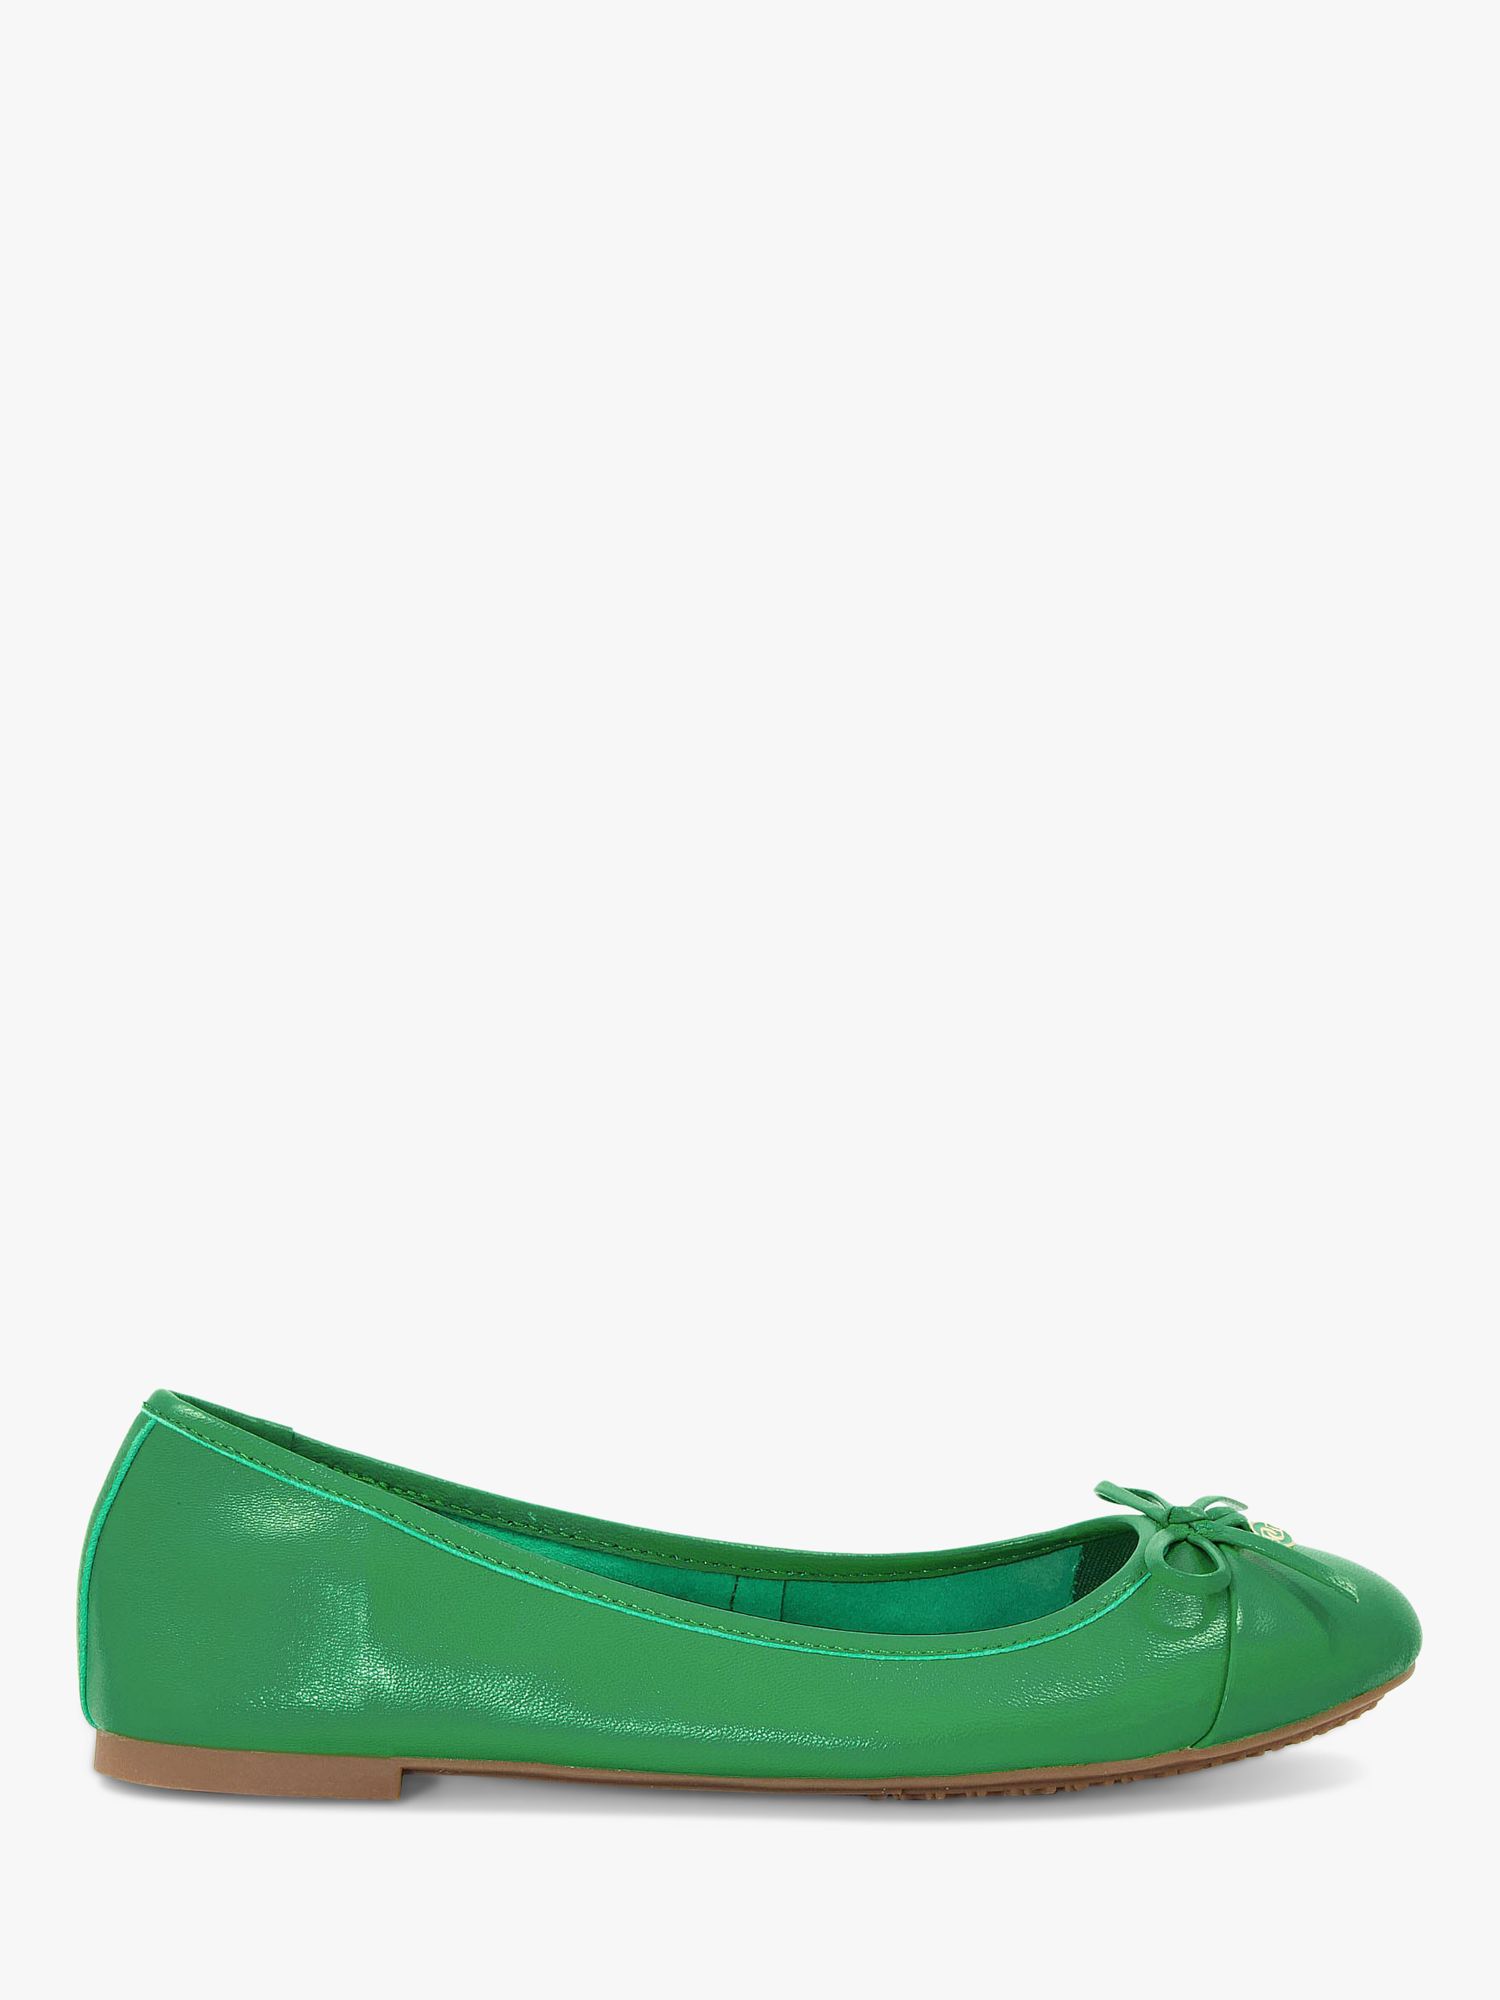 Dune Hallo Leather Charm Bow Ballet Pumps Green At John Lewis And Partners